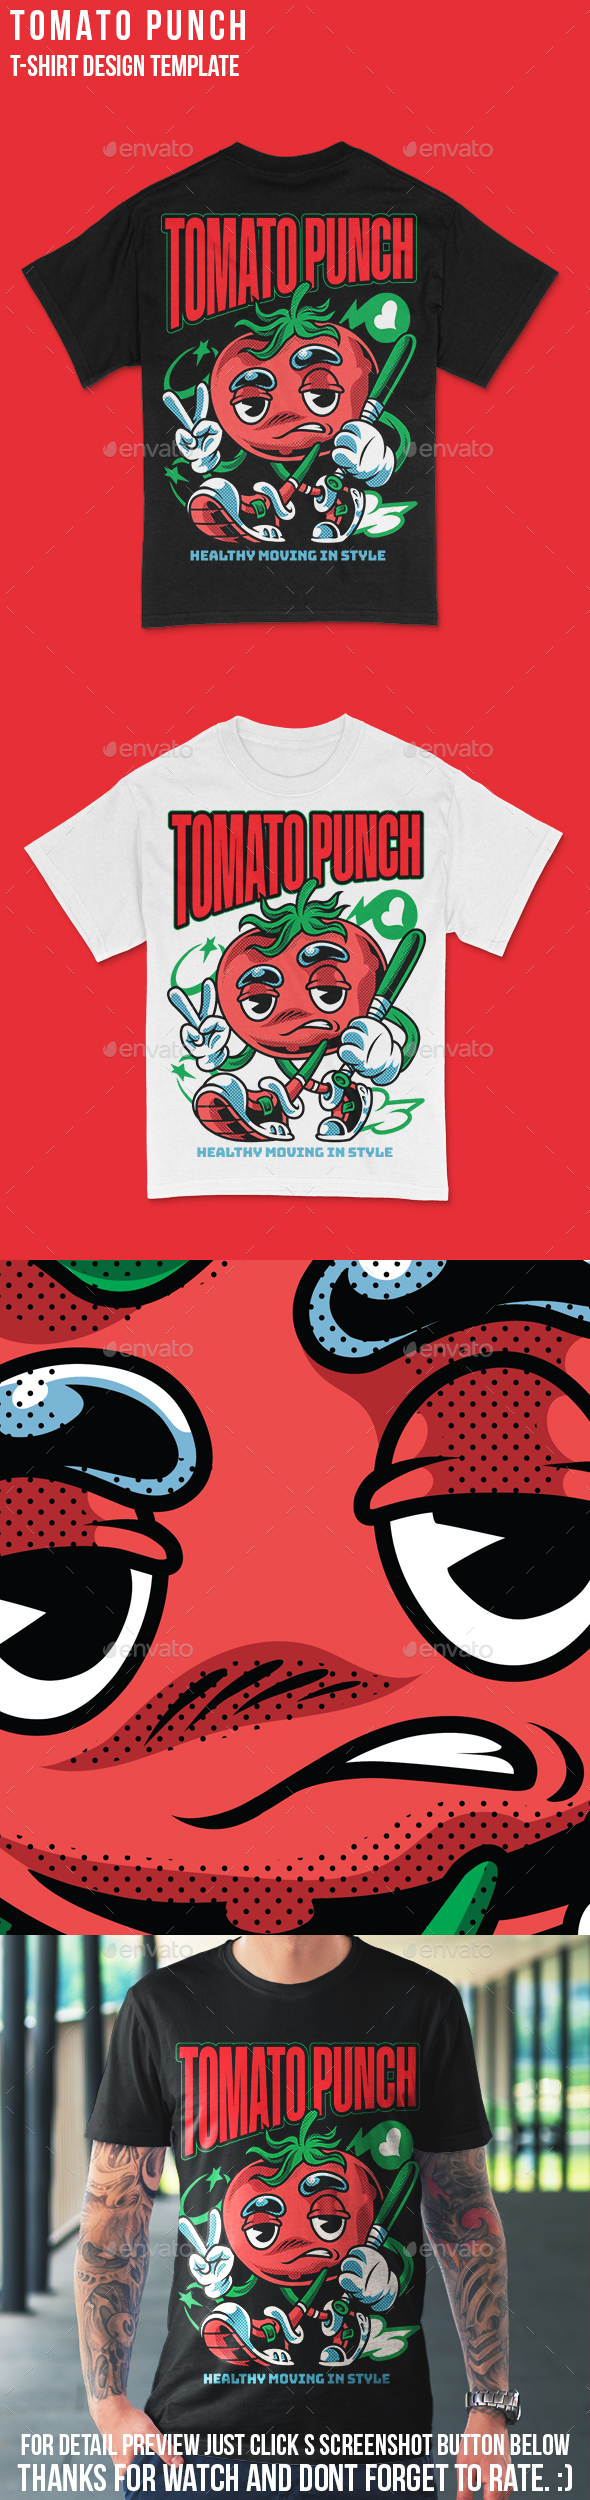 Tomato Punch T-Shirt Design Template